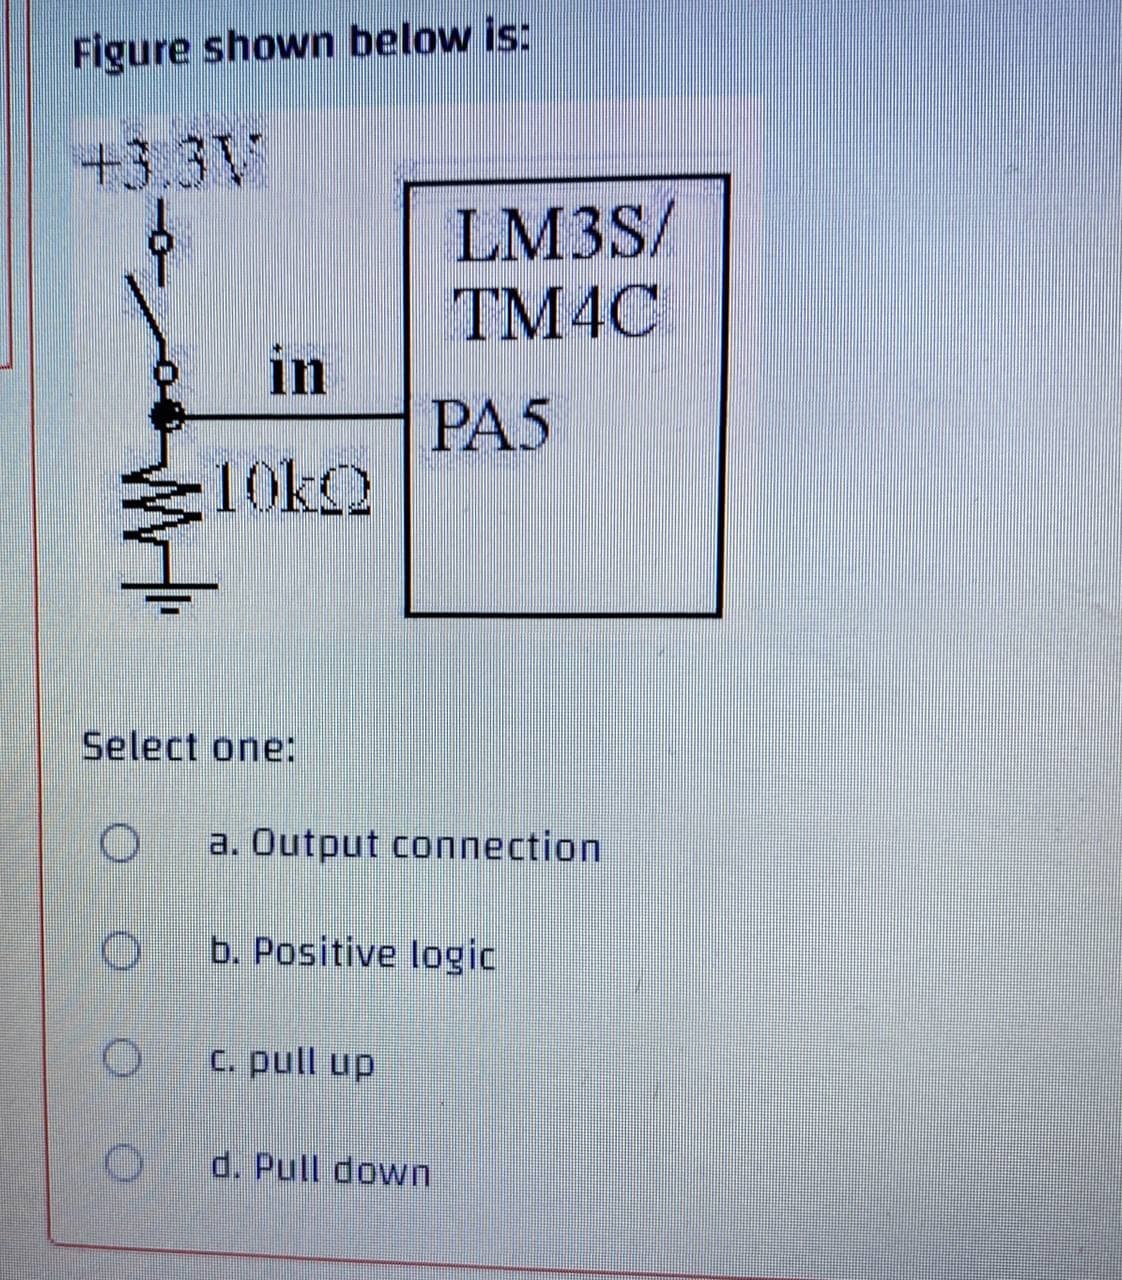 Figure shown below is:
+3.3V
in
10kQ
LM3S/
TM4C
PA5
Select one:
O a. Output connection
Ob. Positive logic
c. pull up
d. Pull down